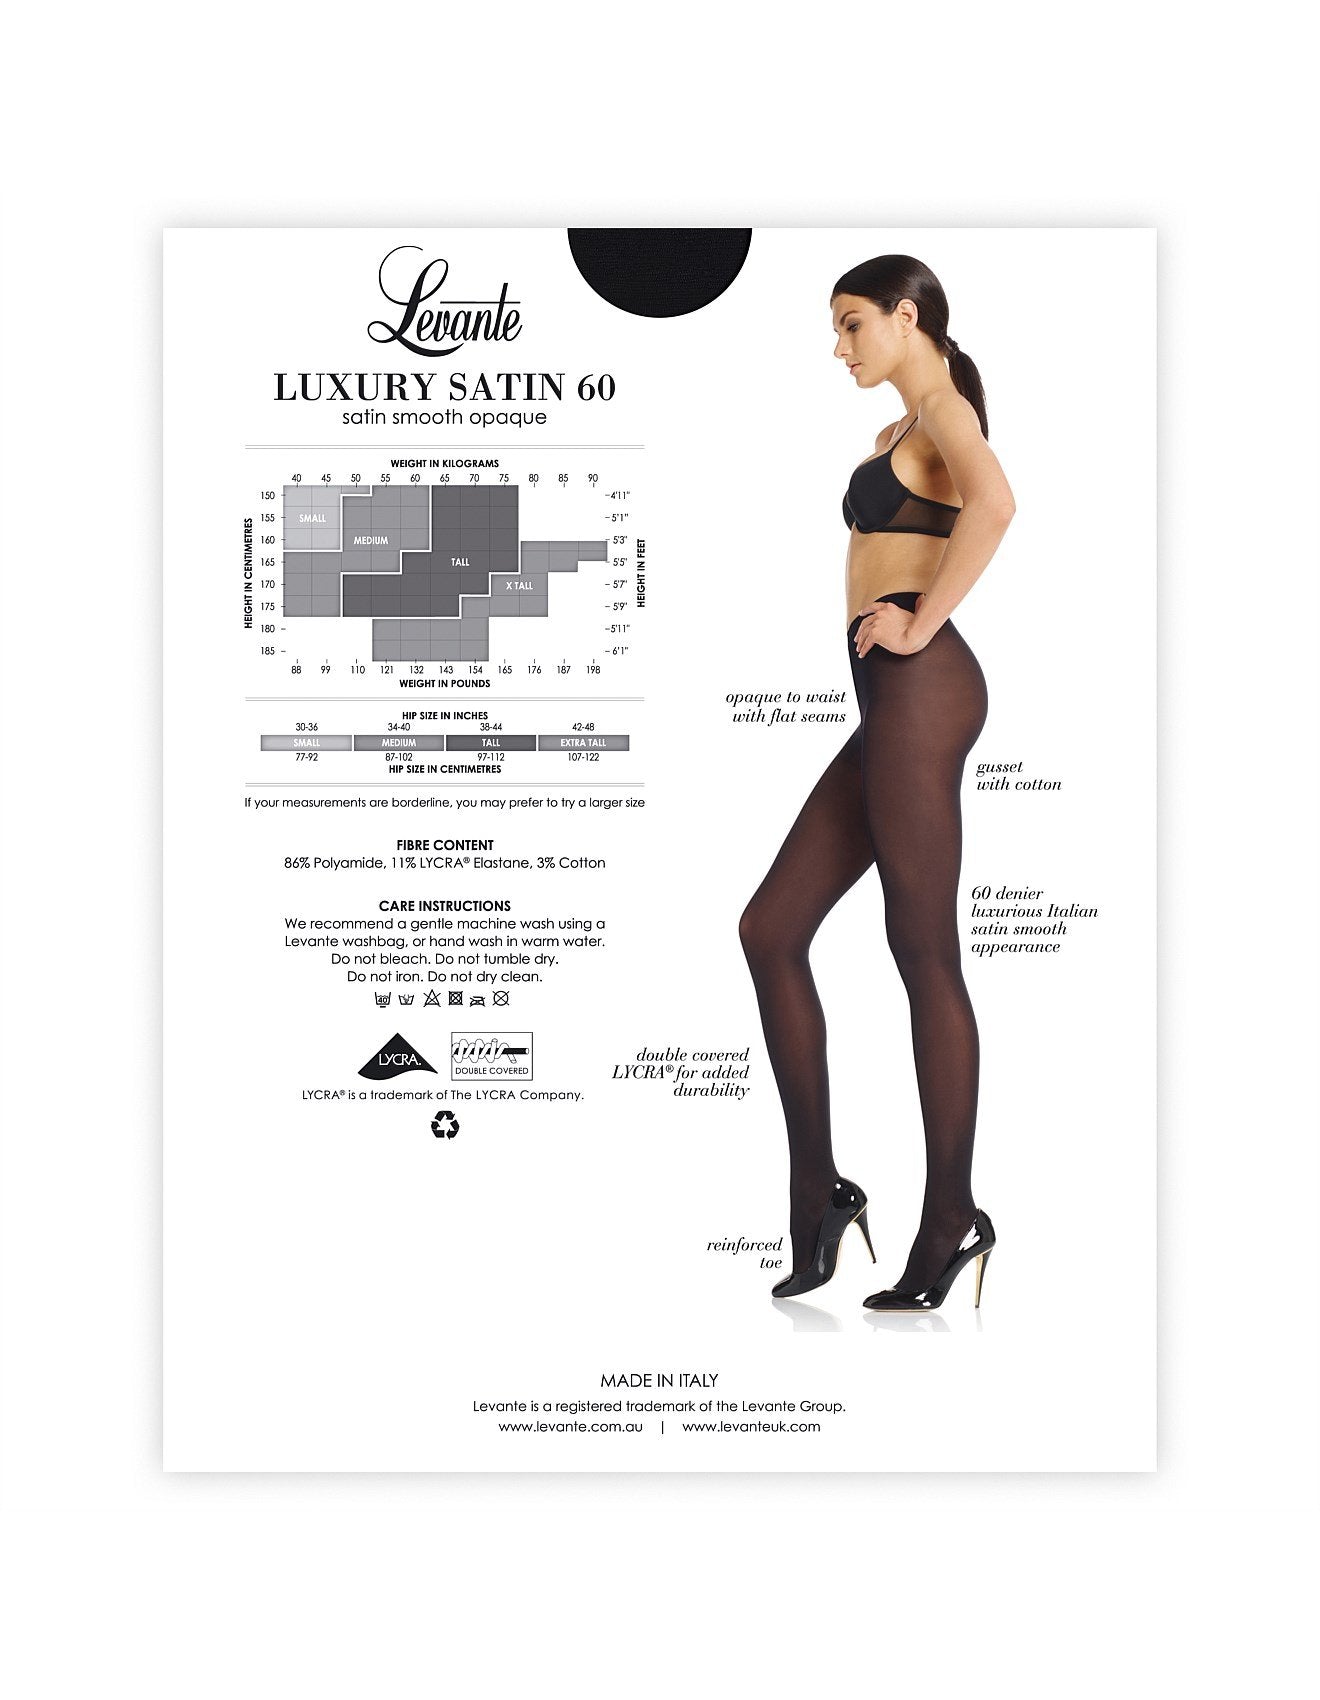 Levante Luxury Satin Opaque - Pantyhose  Available at Illusions Lingerie